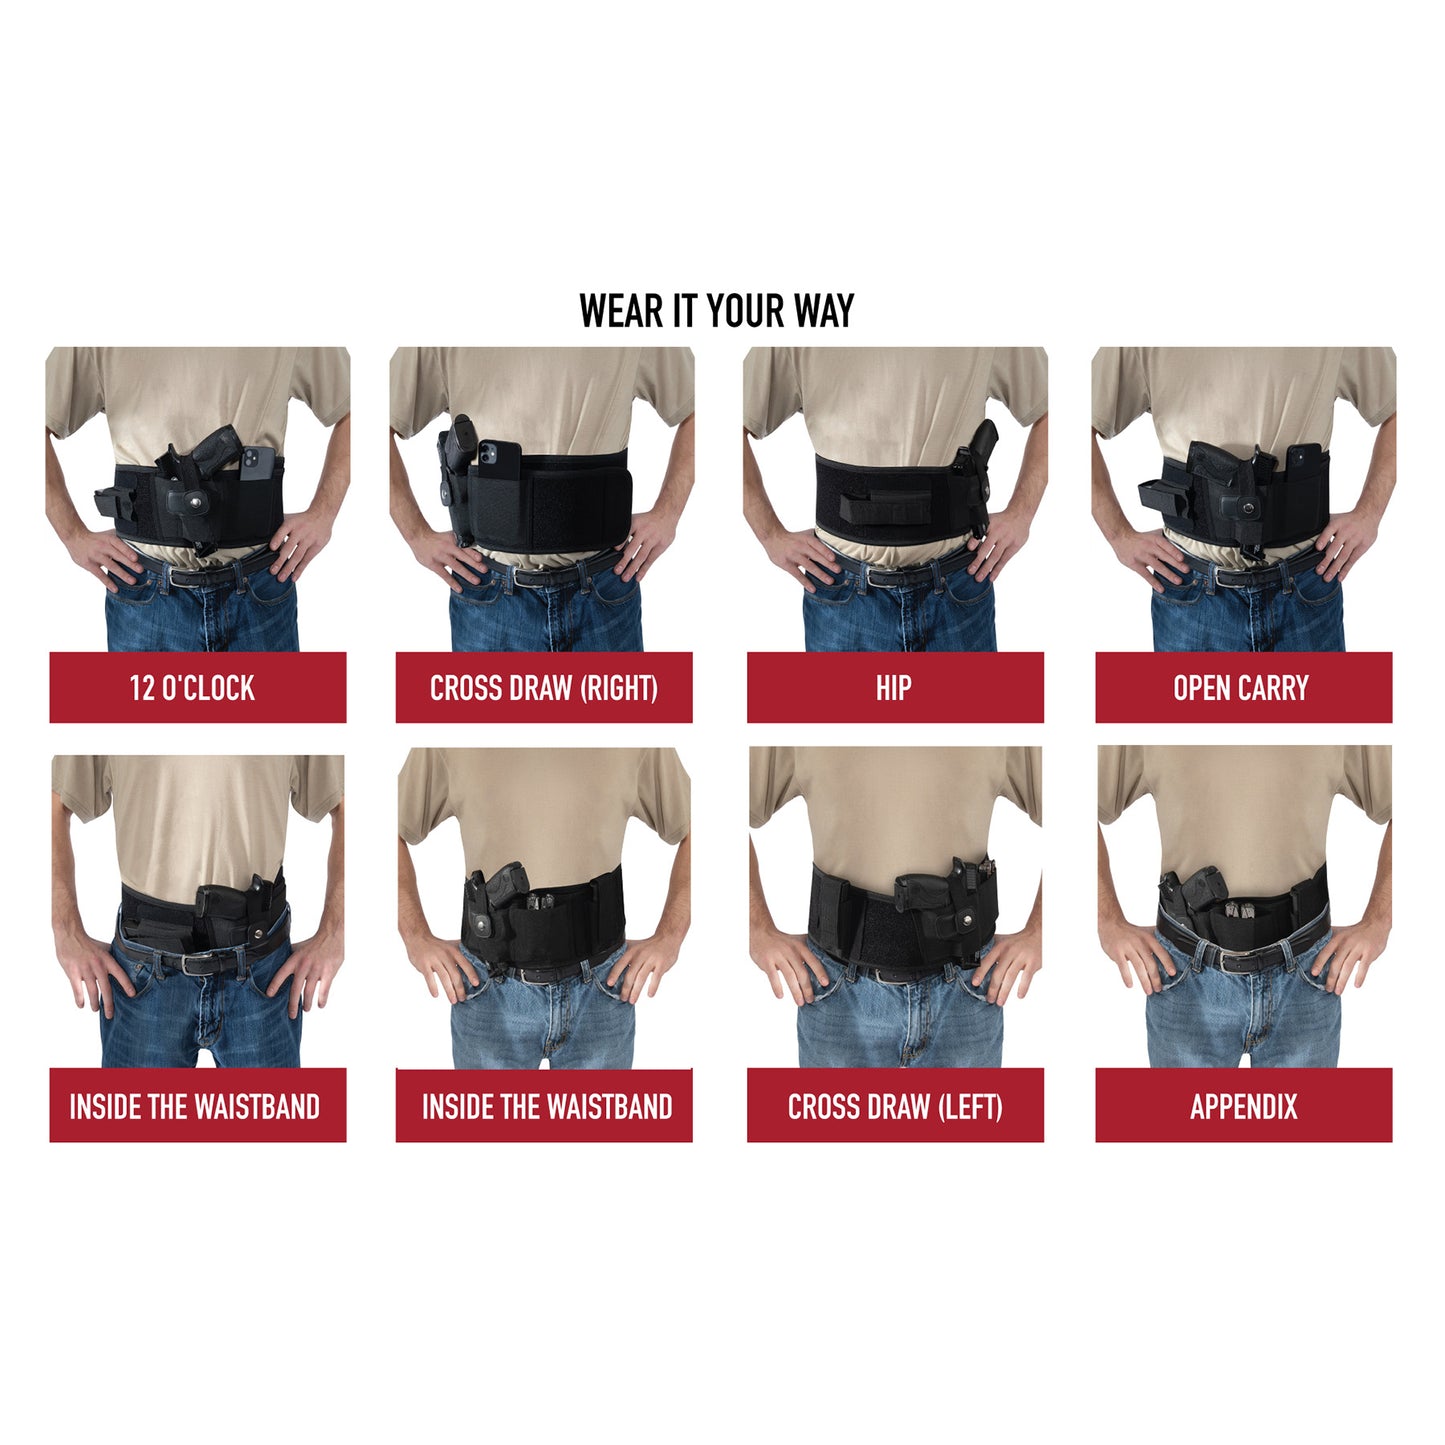 Rothco Concealed Carry Neoprene Belly Band Holster